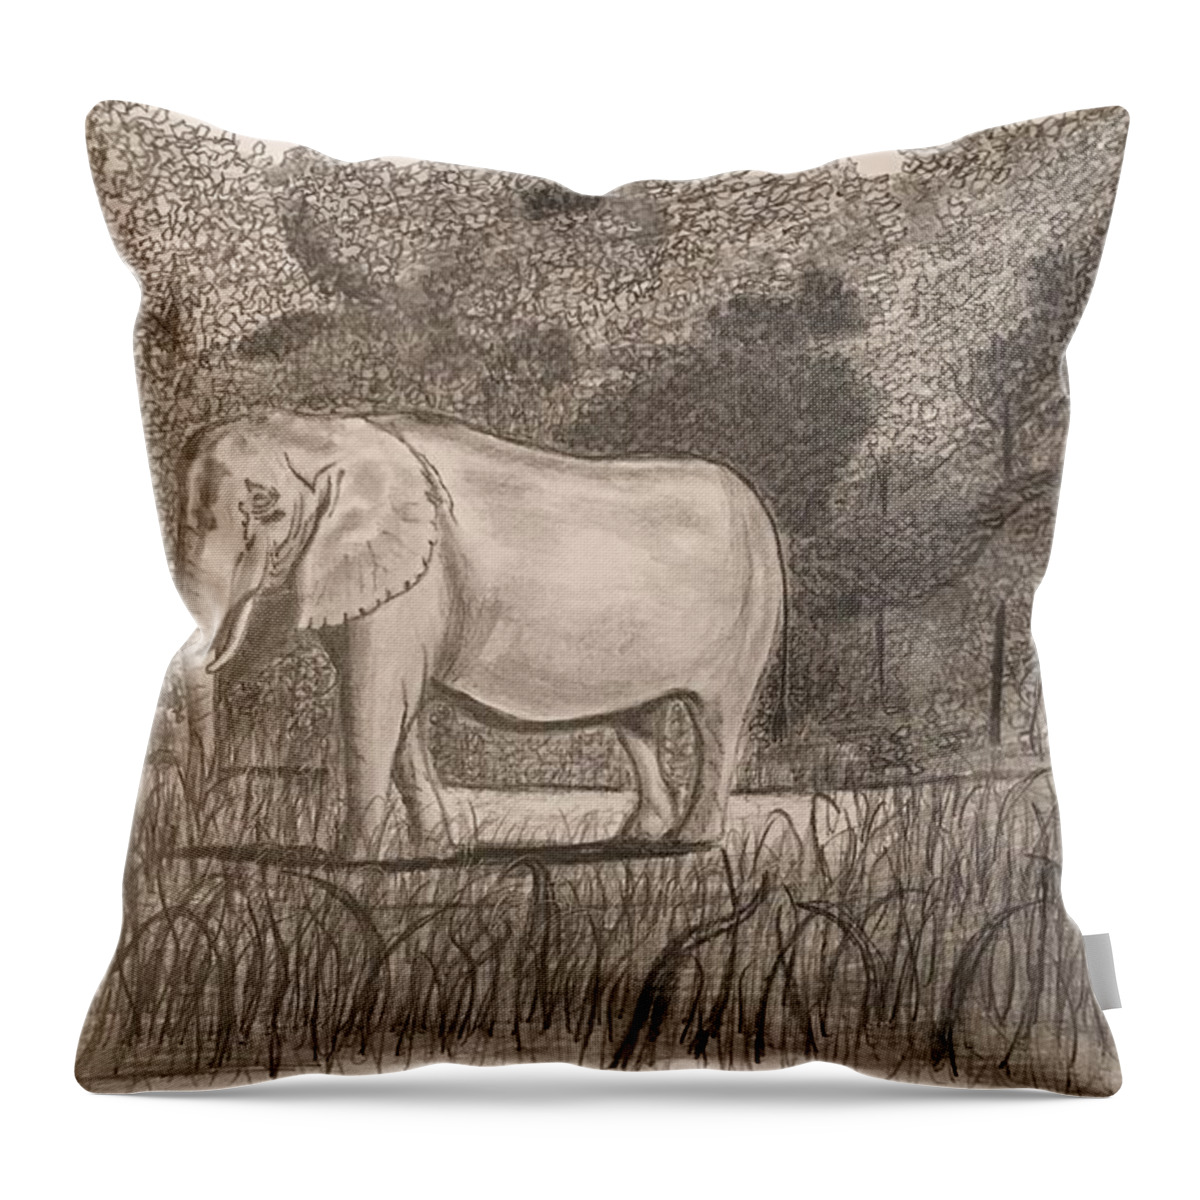 Elephant Throw Pillow featuring the drawing On Safari by Tony Clark